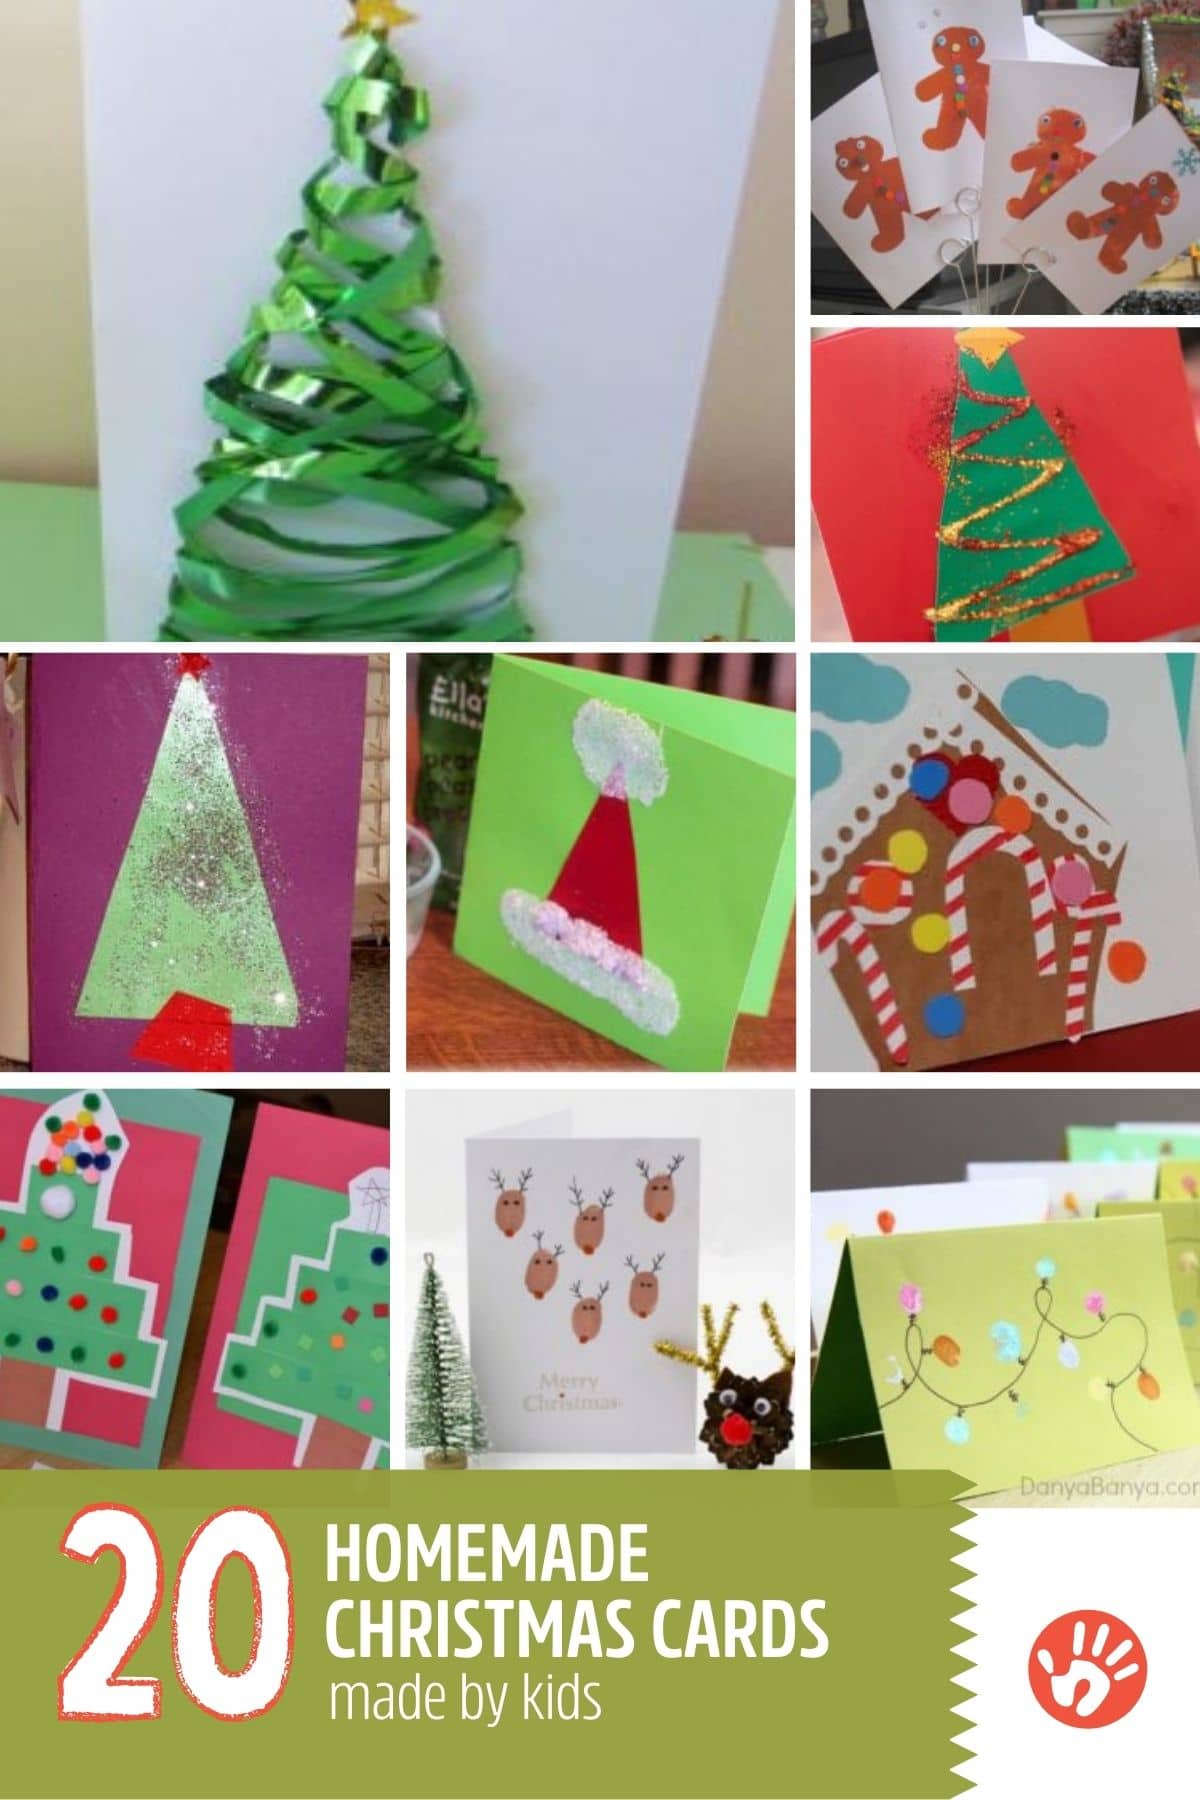 Hands-On Christmas Activities for Kids - I Can Teach My Child!